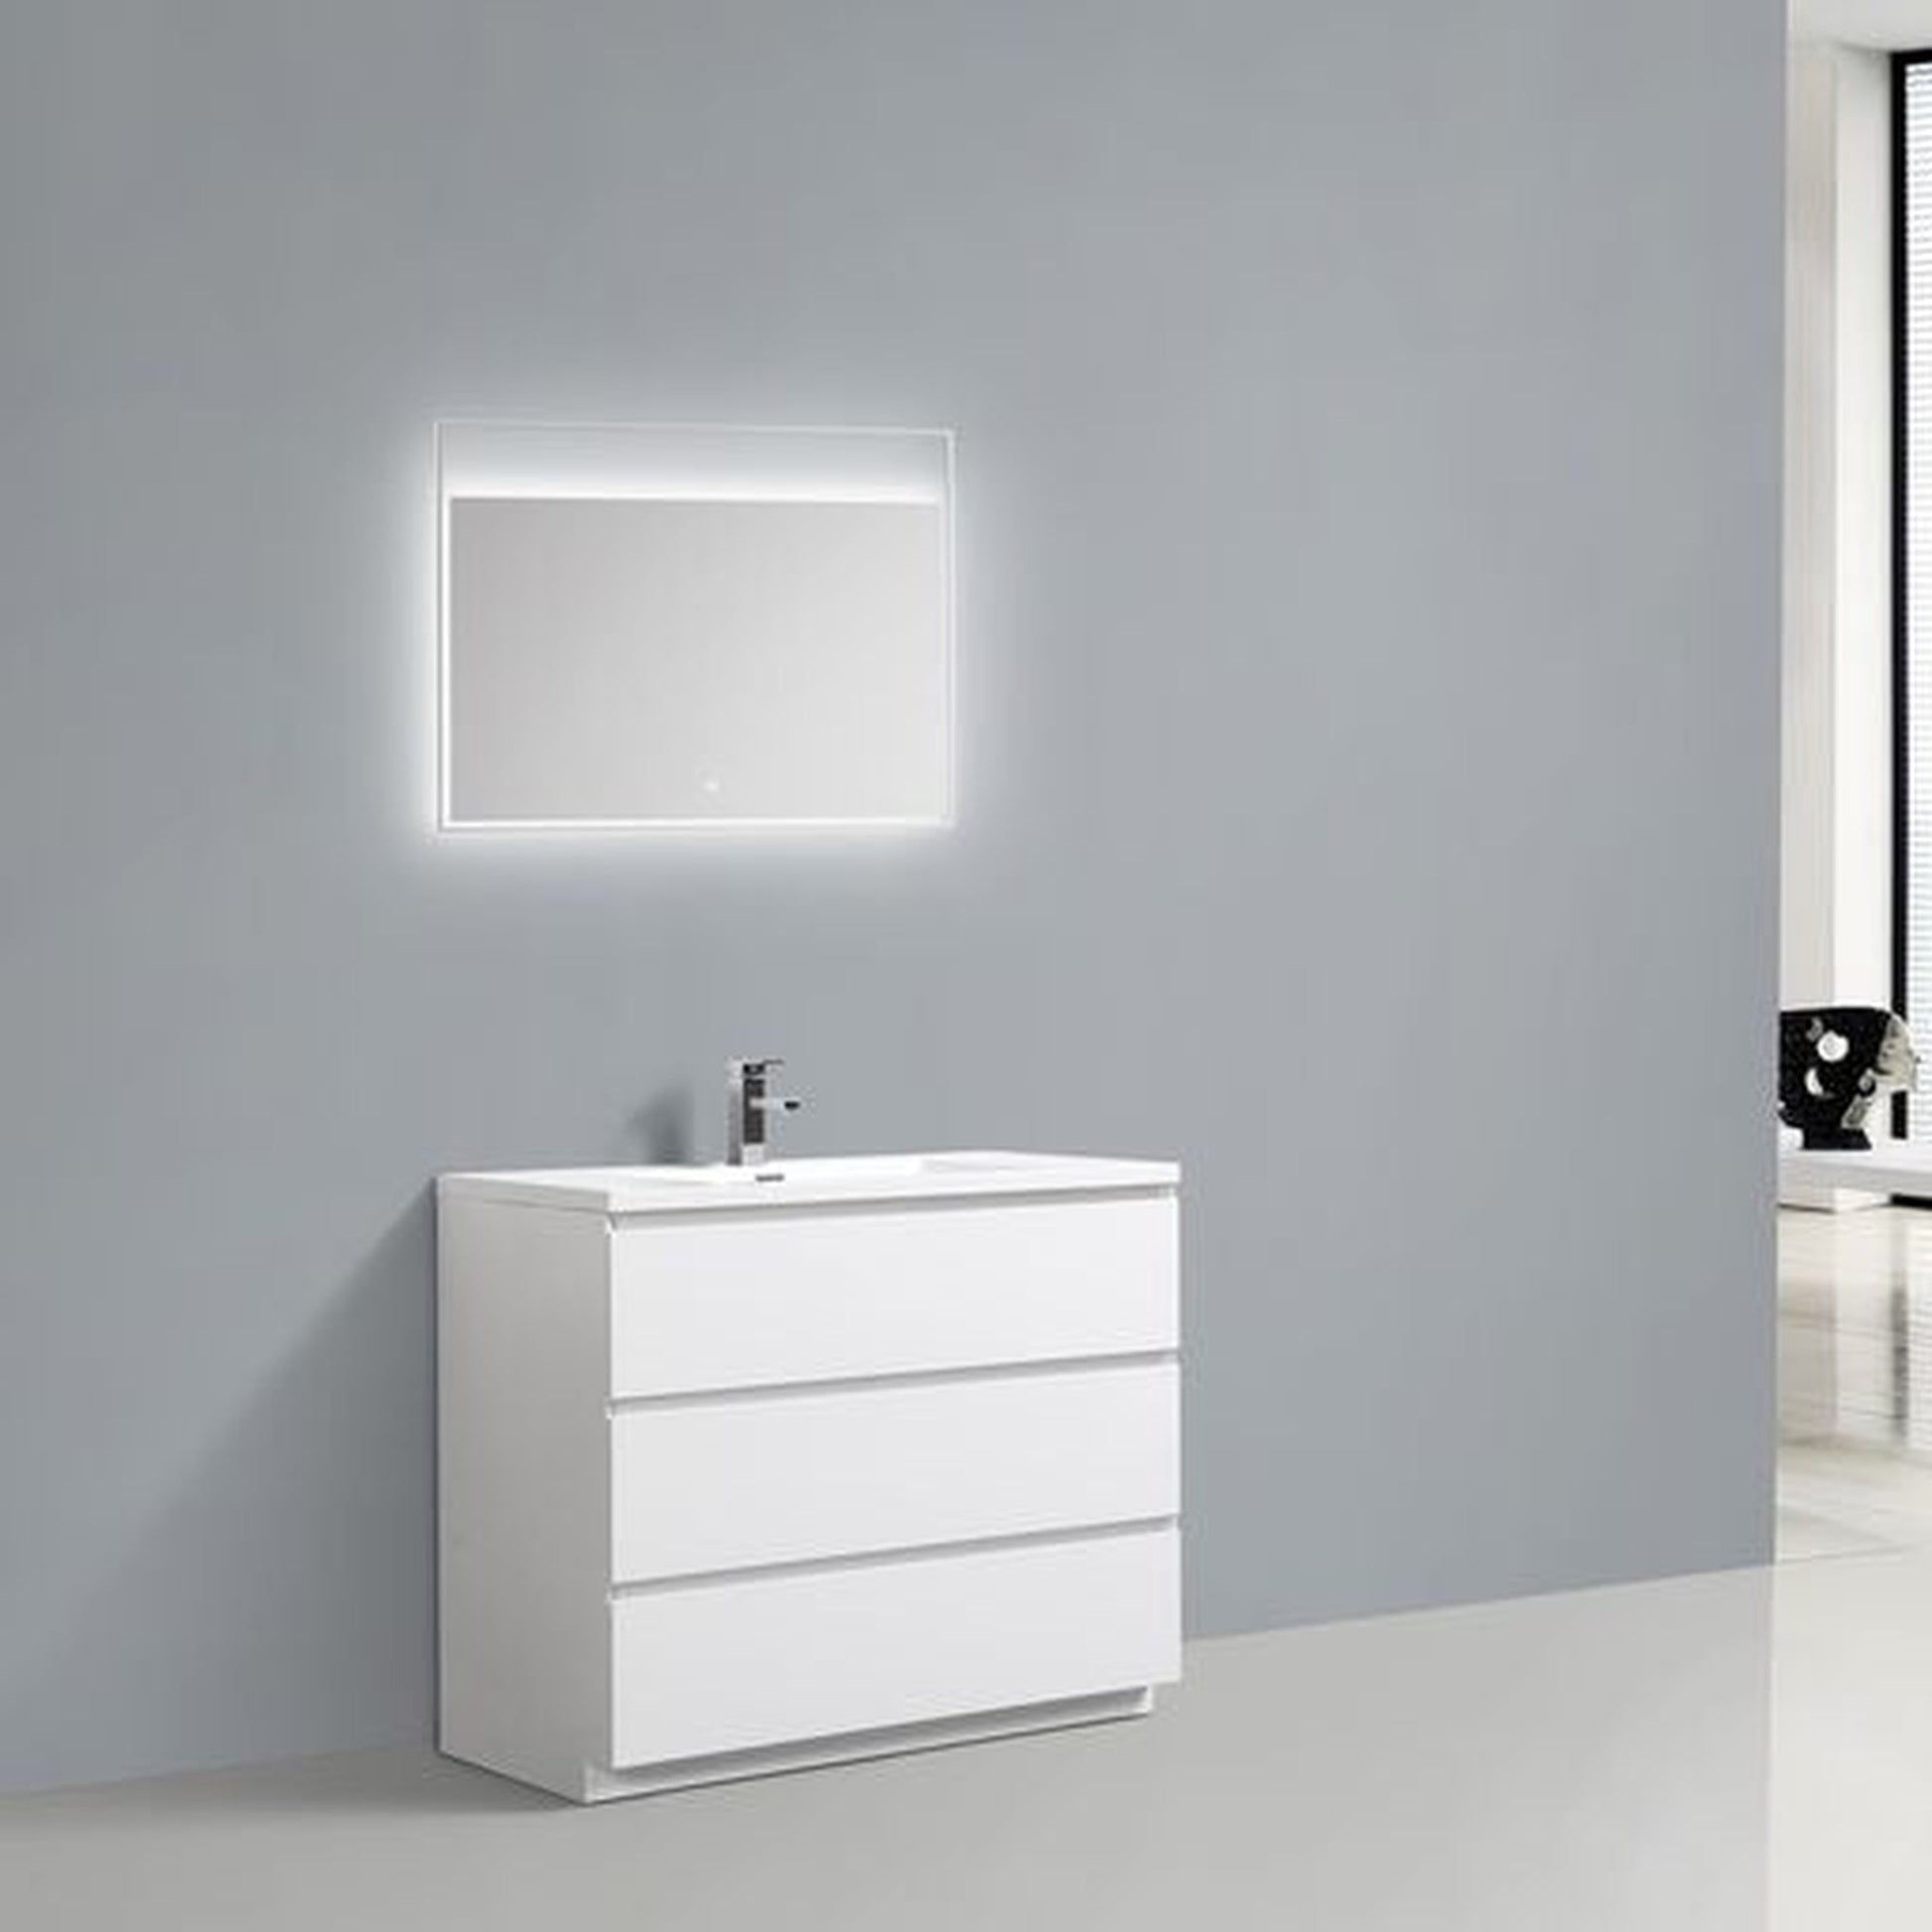 Moreno Bath Angeles 42" High Gloss White Freestanding Vanity With Single Reinforced White Acrylic Sink